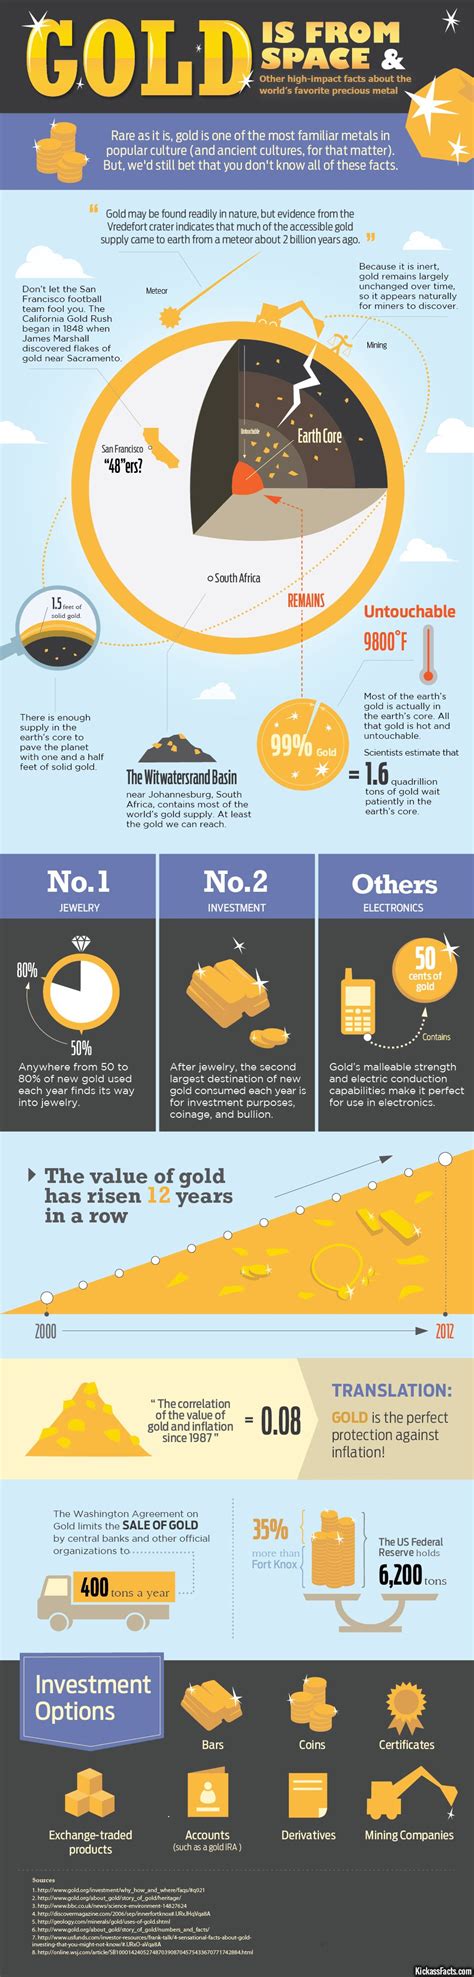 Facts About Gold Infographic